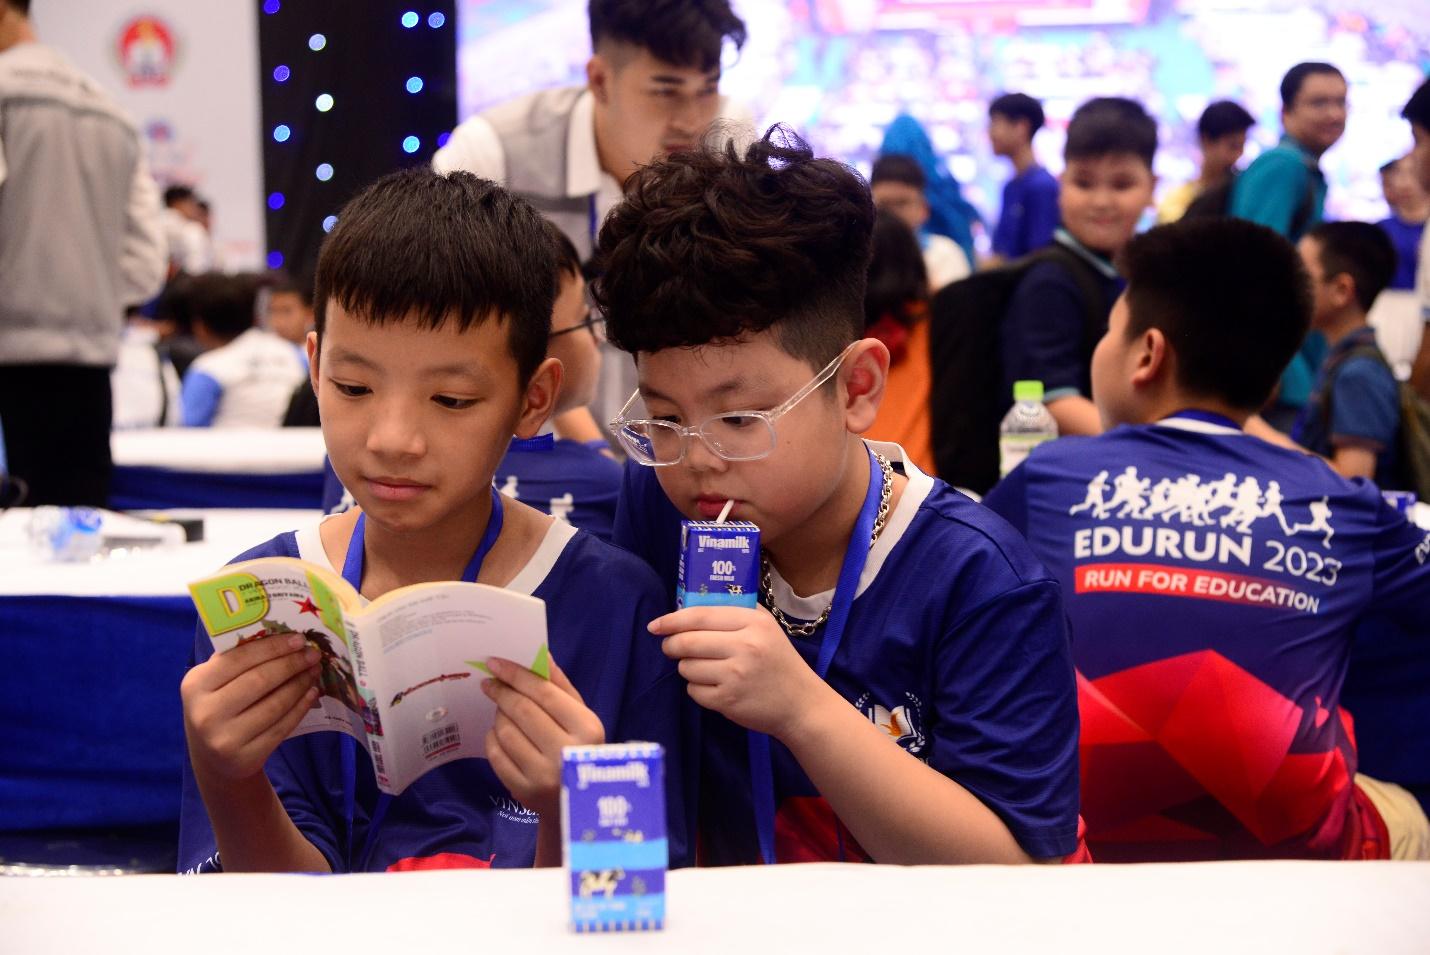 A group of boys sitting at a table reading a book

Description automatically generated